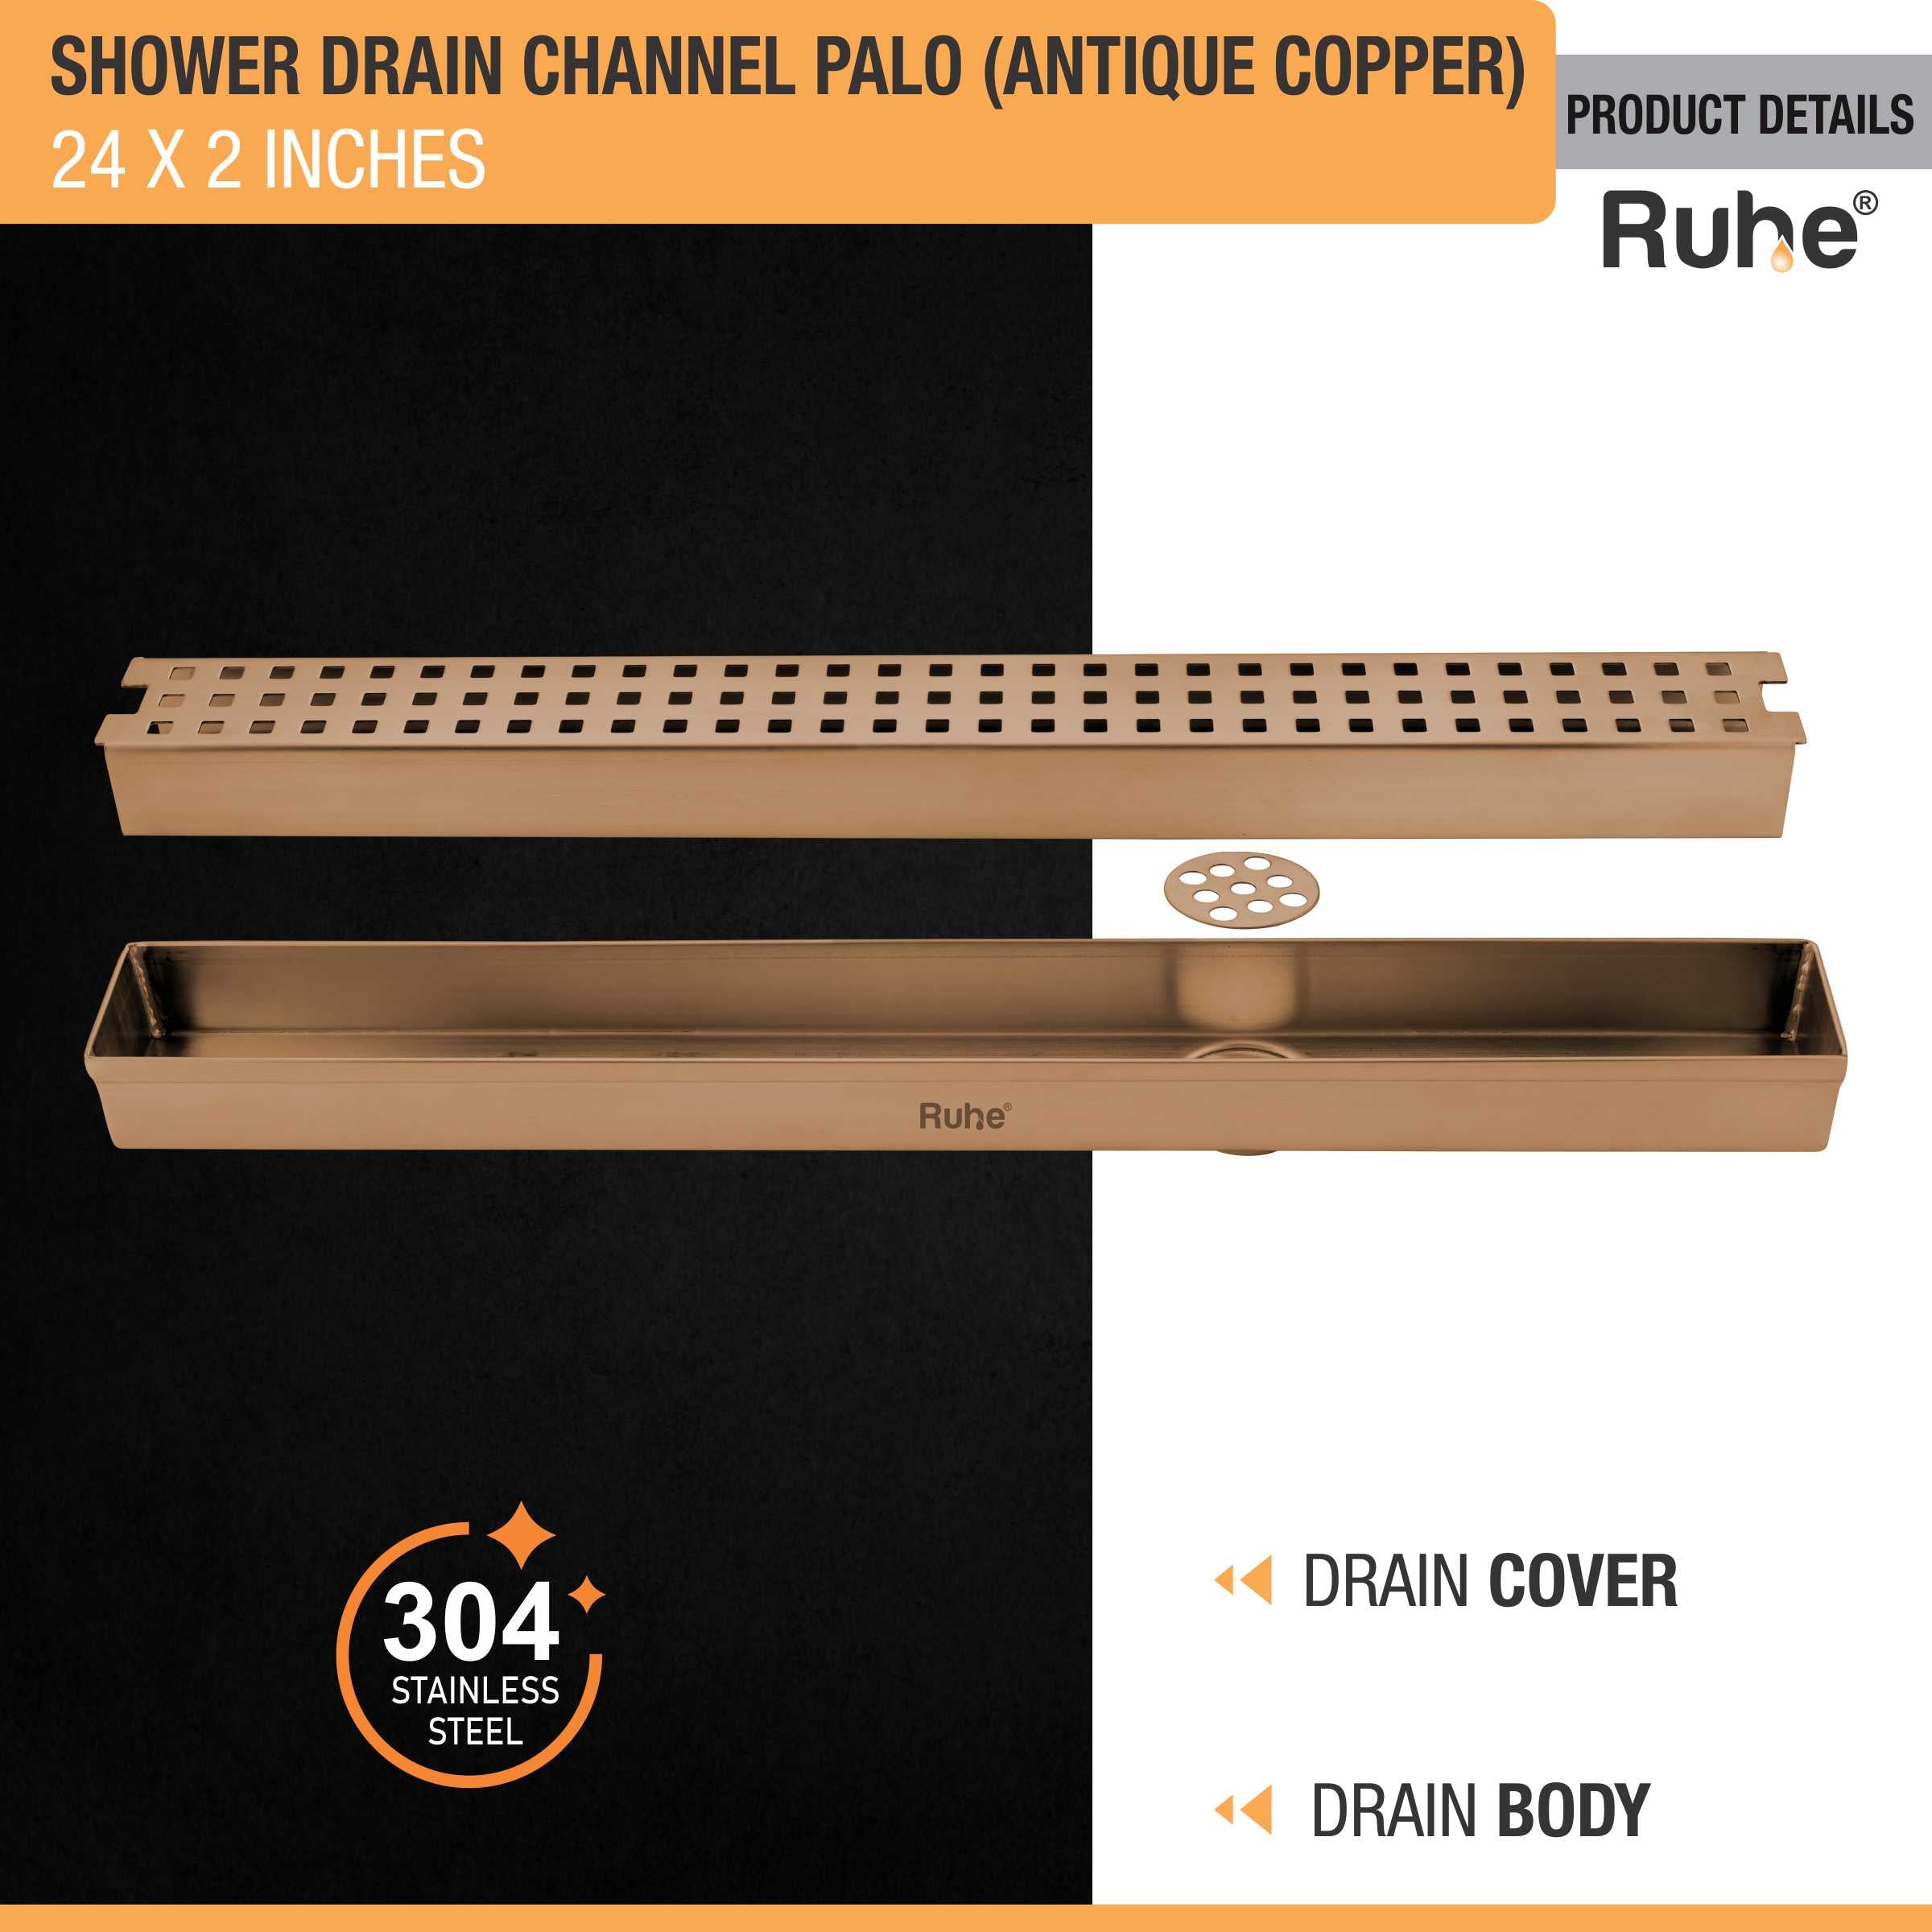 Palo Shower Drain Channel (24 x 2 Inches) ROSE GOLD/ANTIQUE COPPER product details